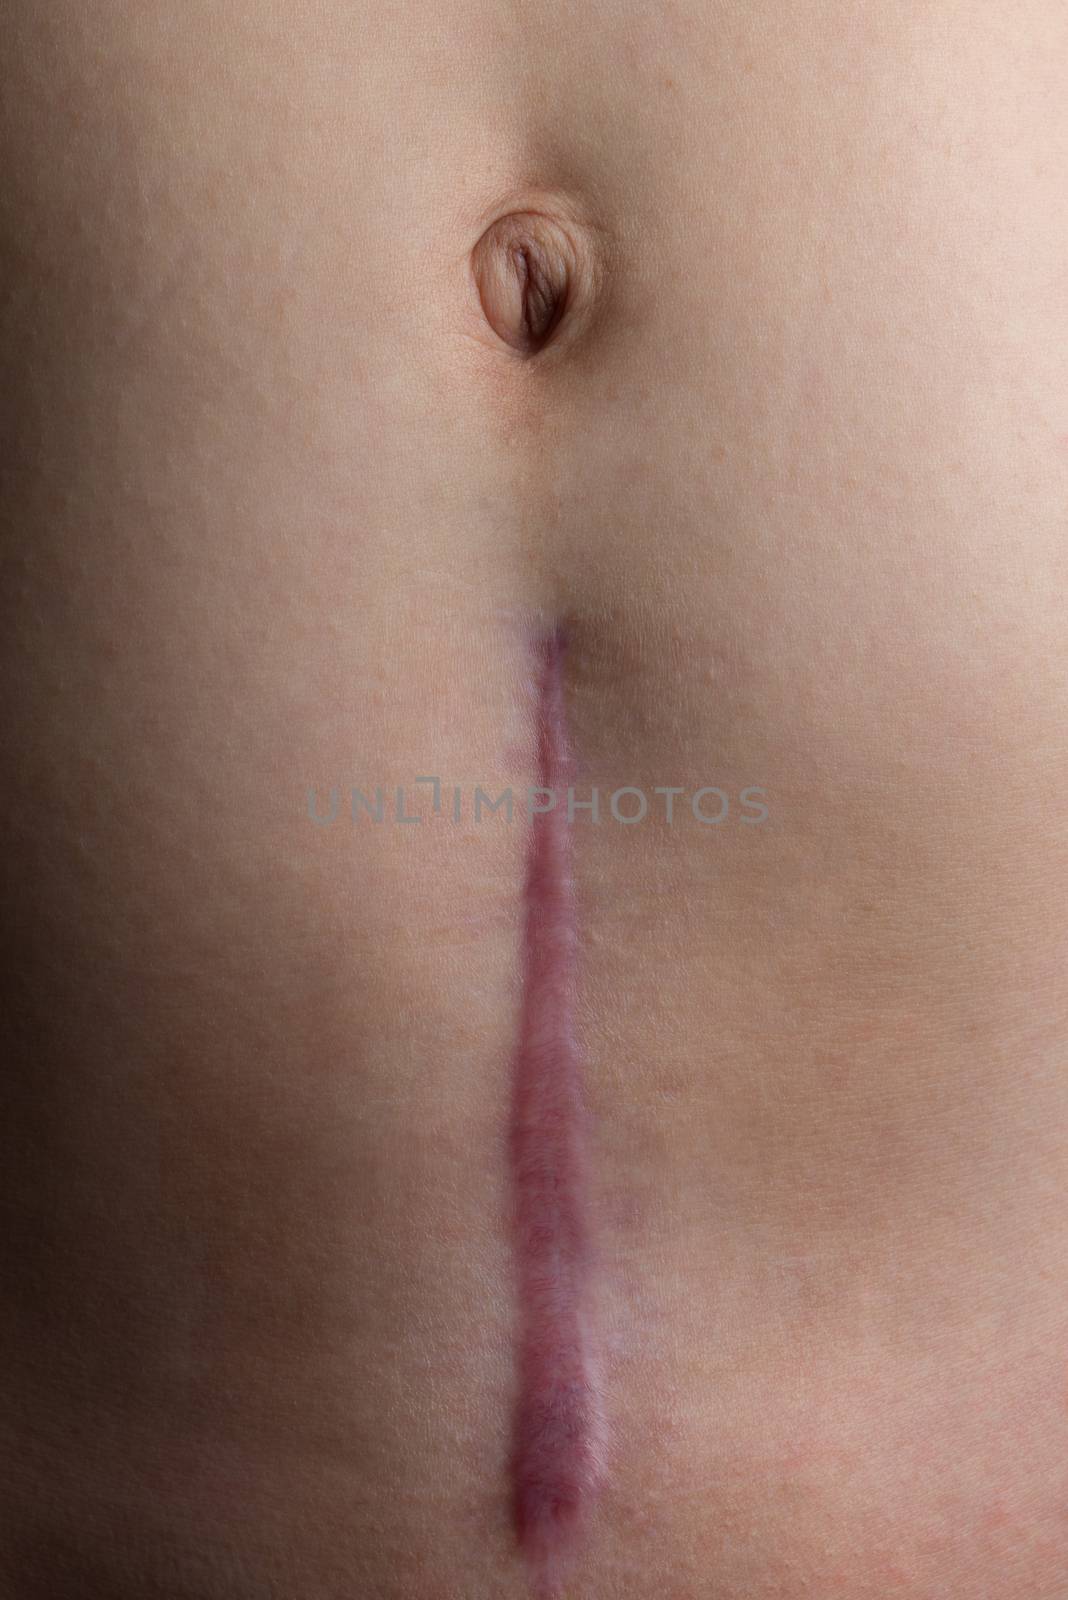 Recovering C-Section Scar by justtscott